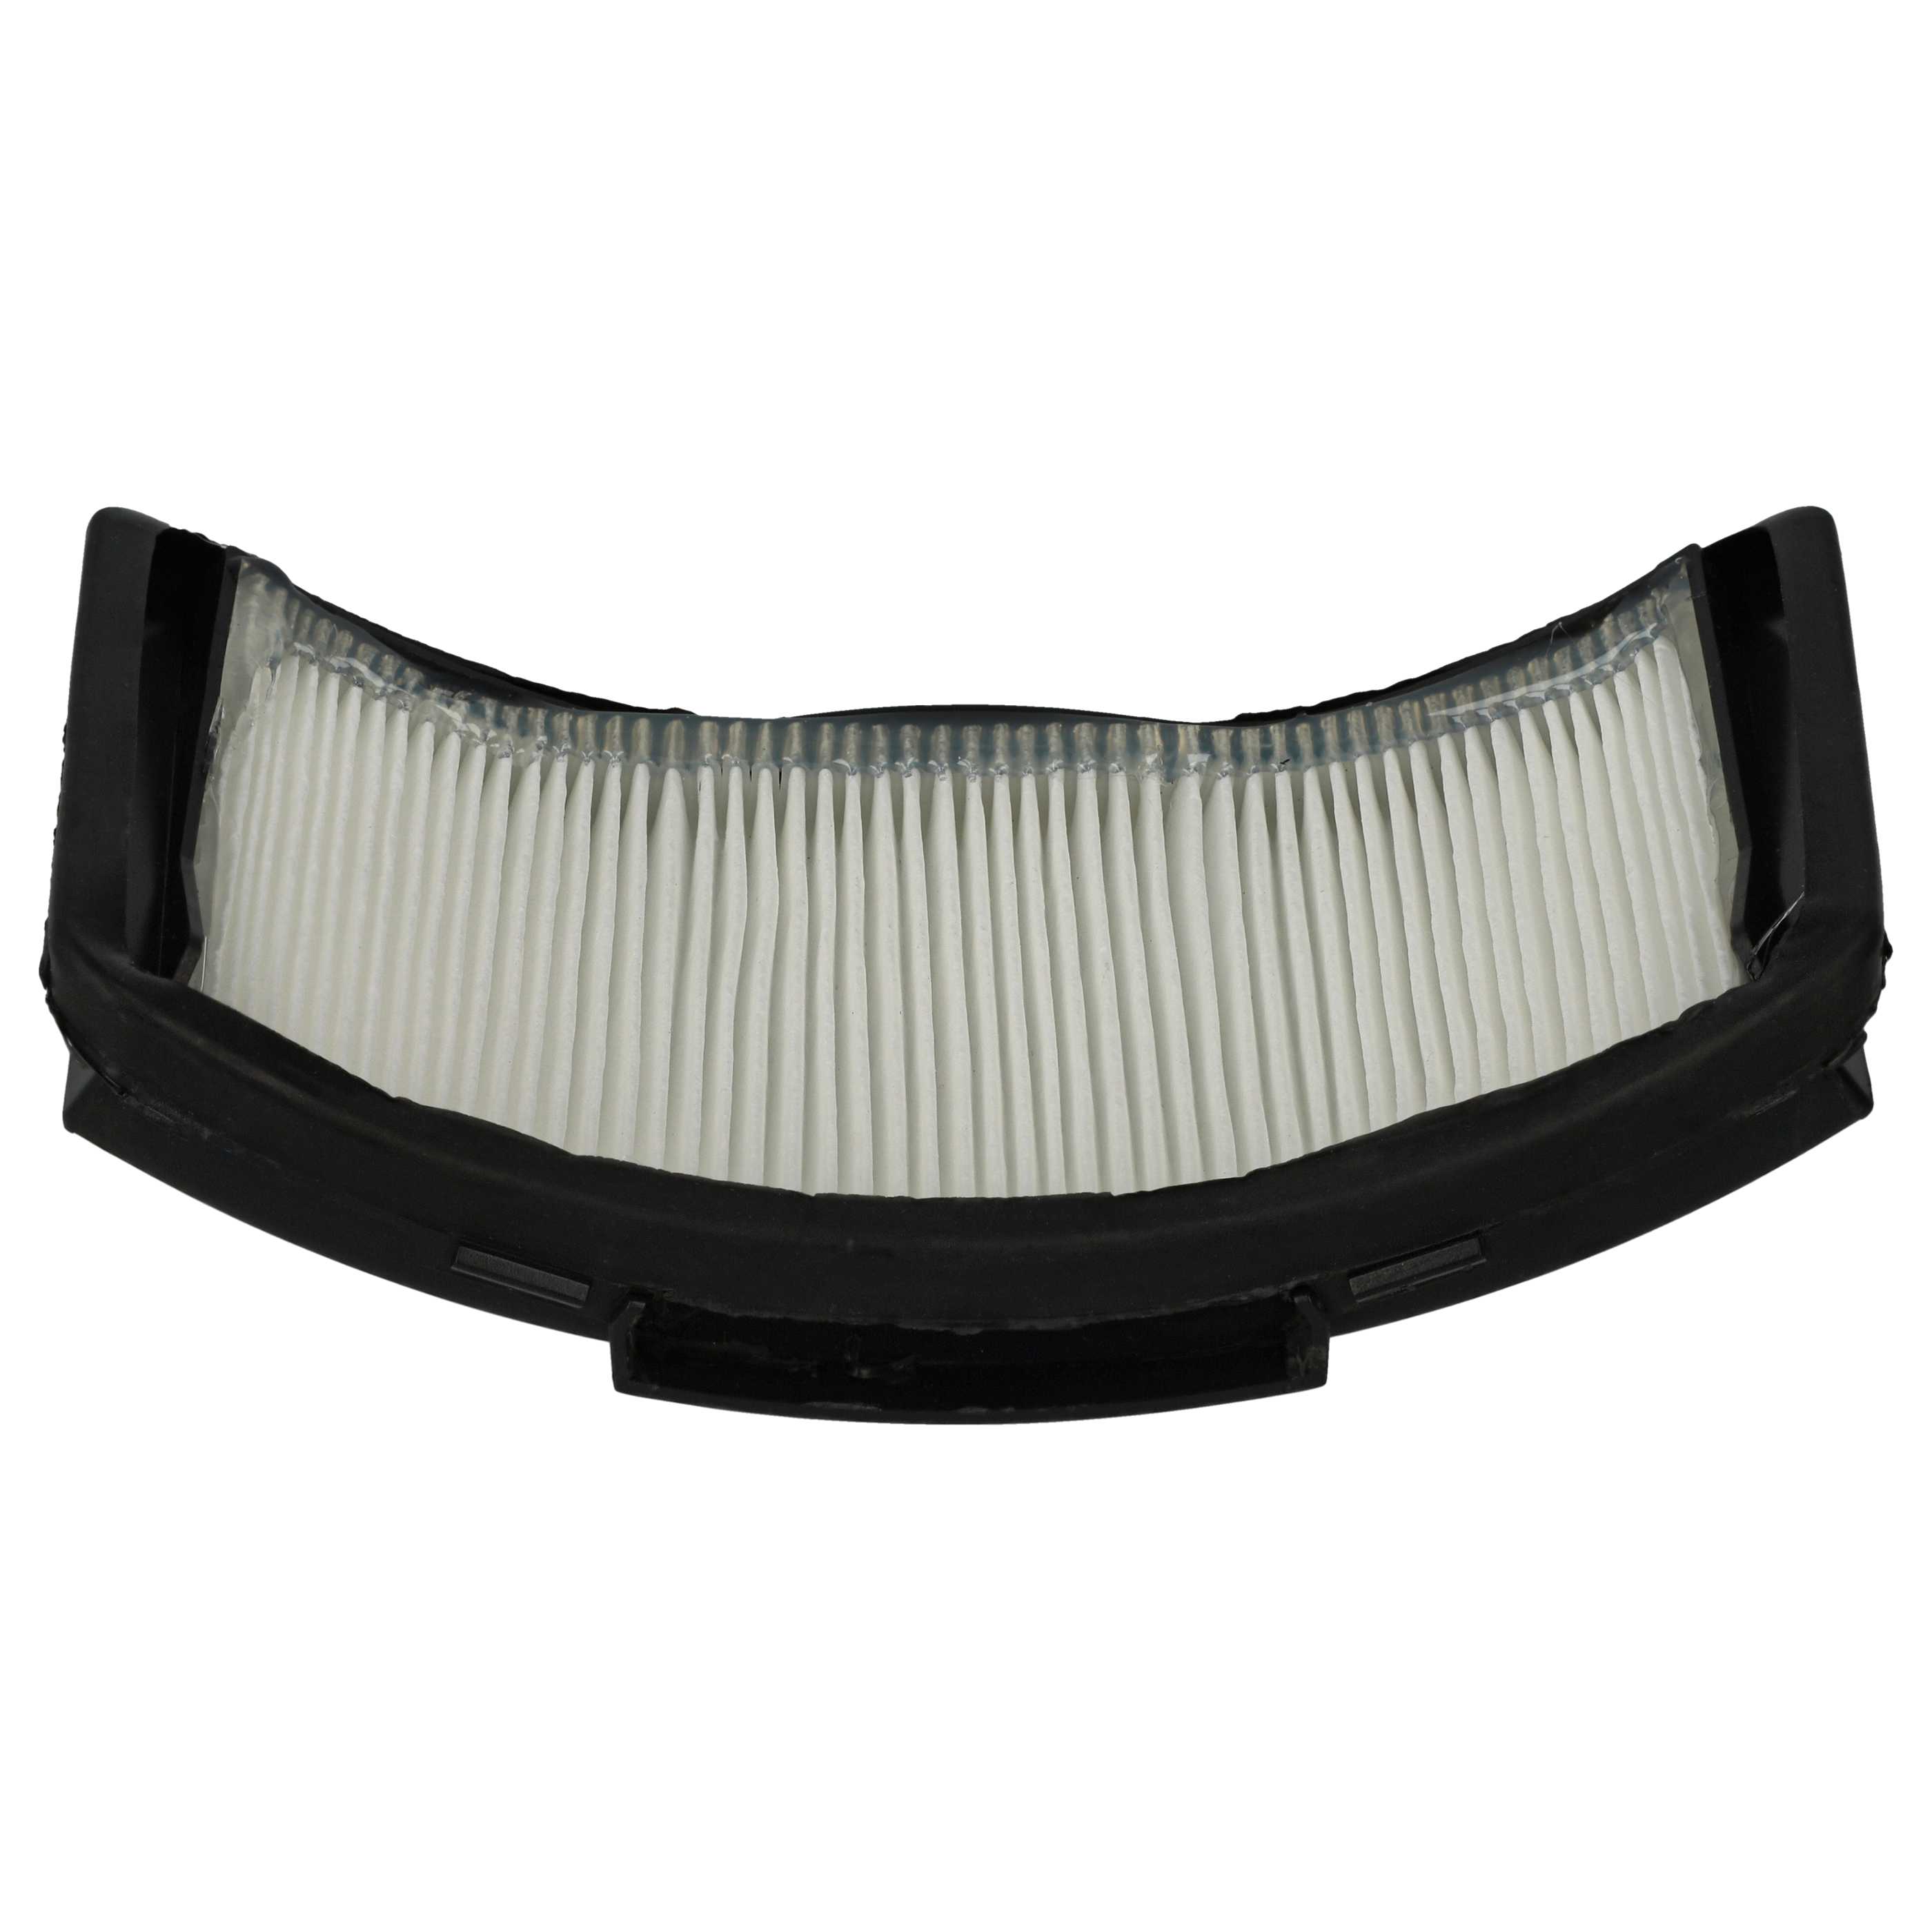 1x post-motor HEPA-filter suitable for Dyson 360 Eye for Dyson Vacuum Cleaner